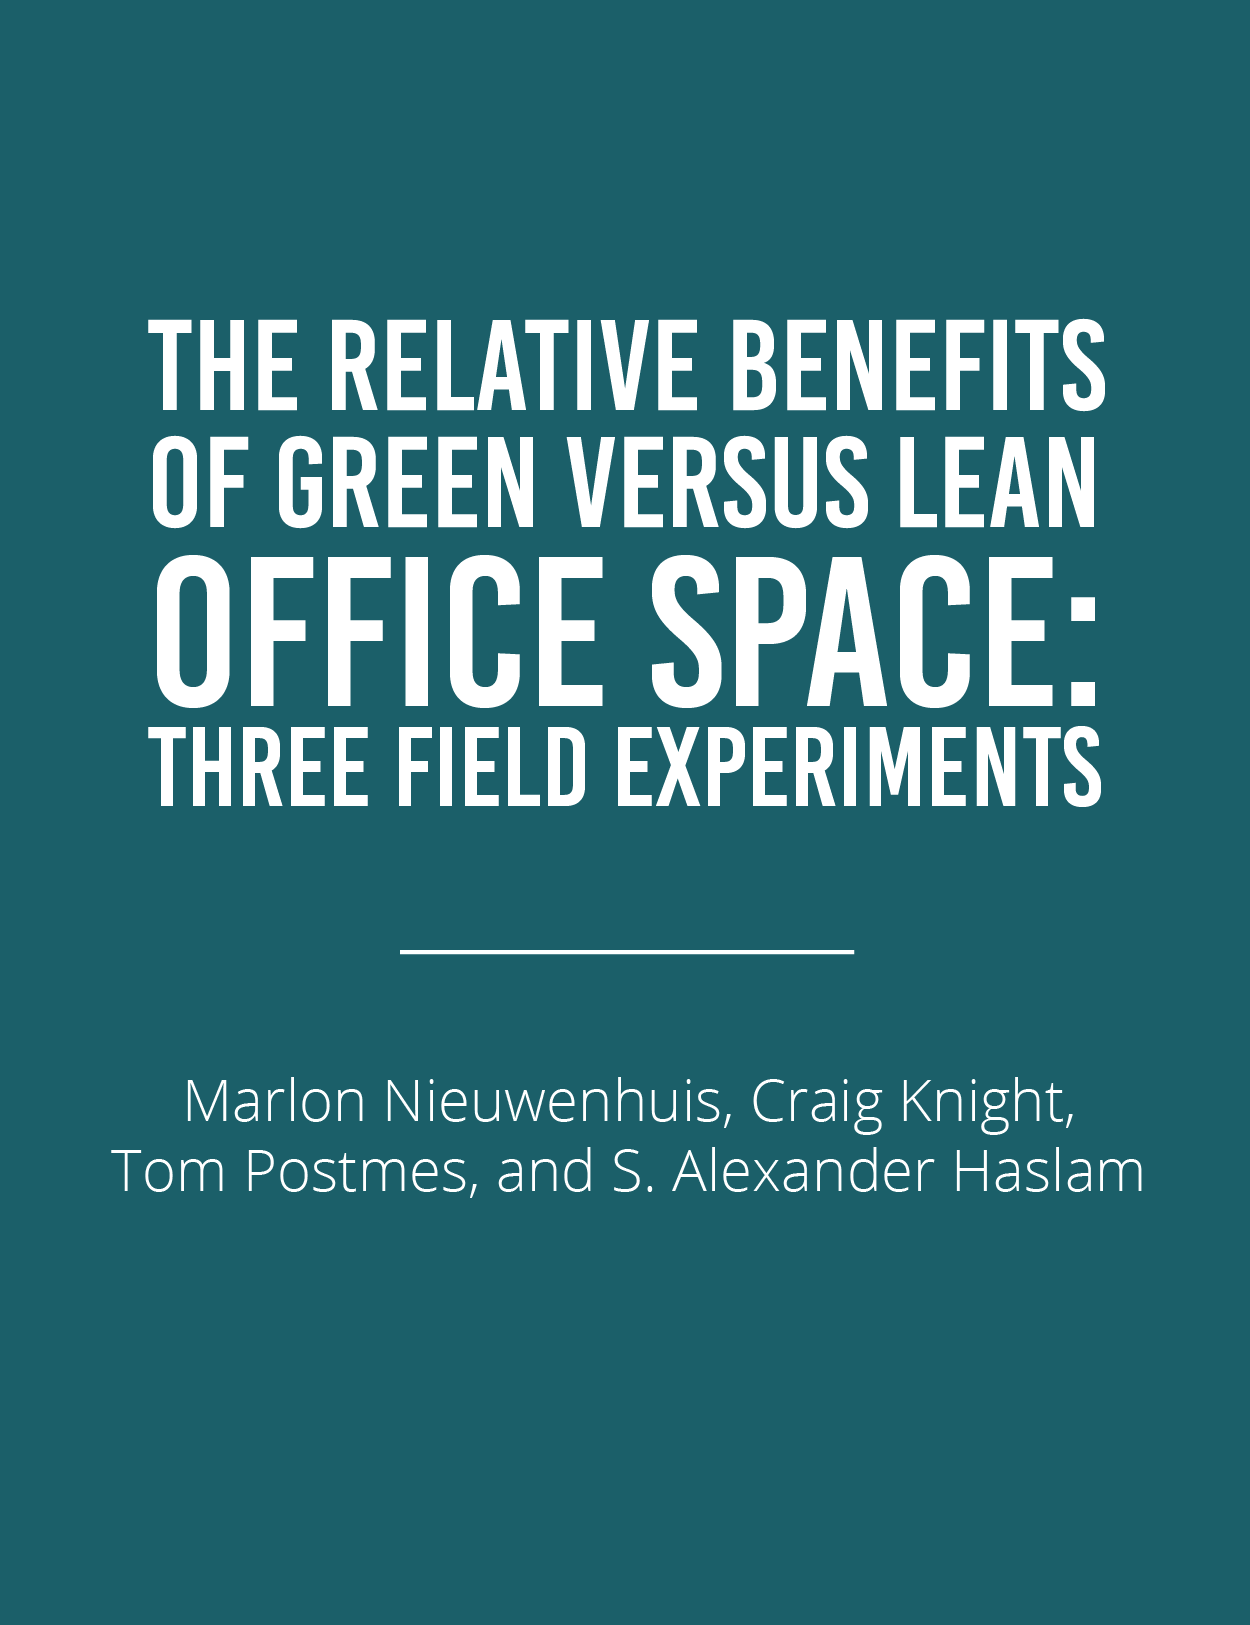 Green vs Lean Office SpaceFeatured Image